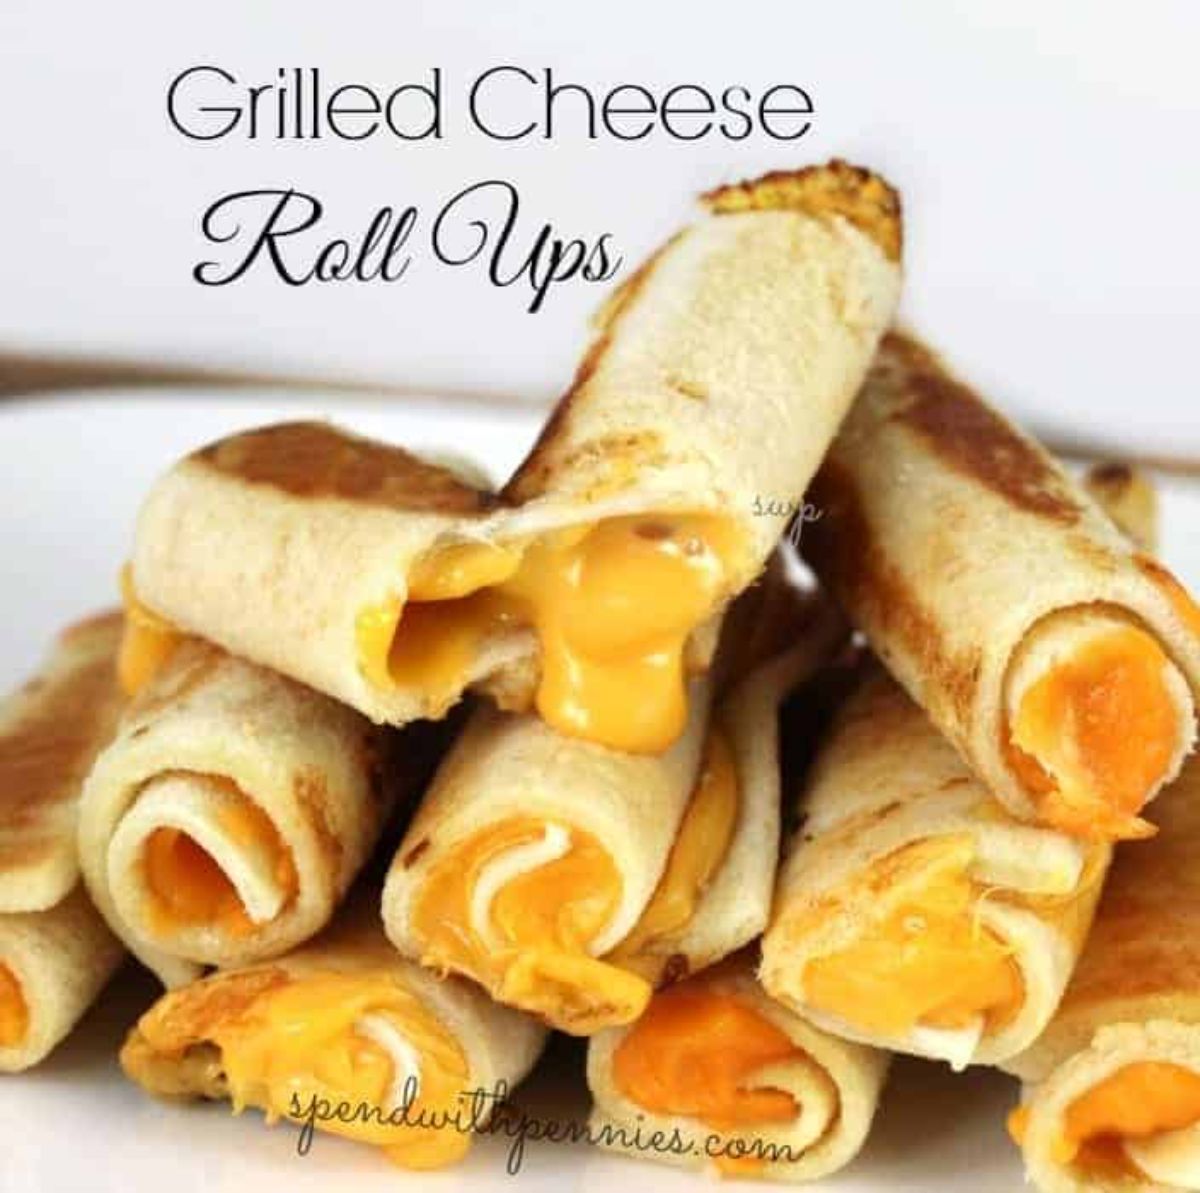 The text reads "Grilled cheese roll ups" the image is of a pile of grilled cheese roll ups